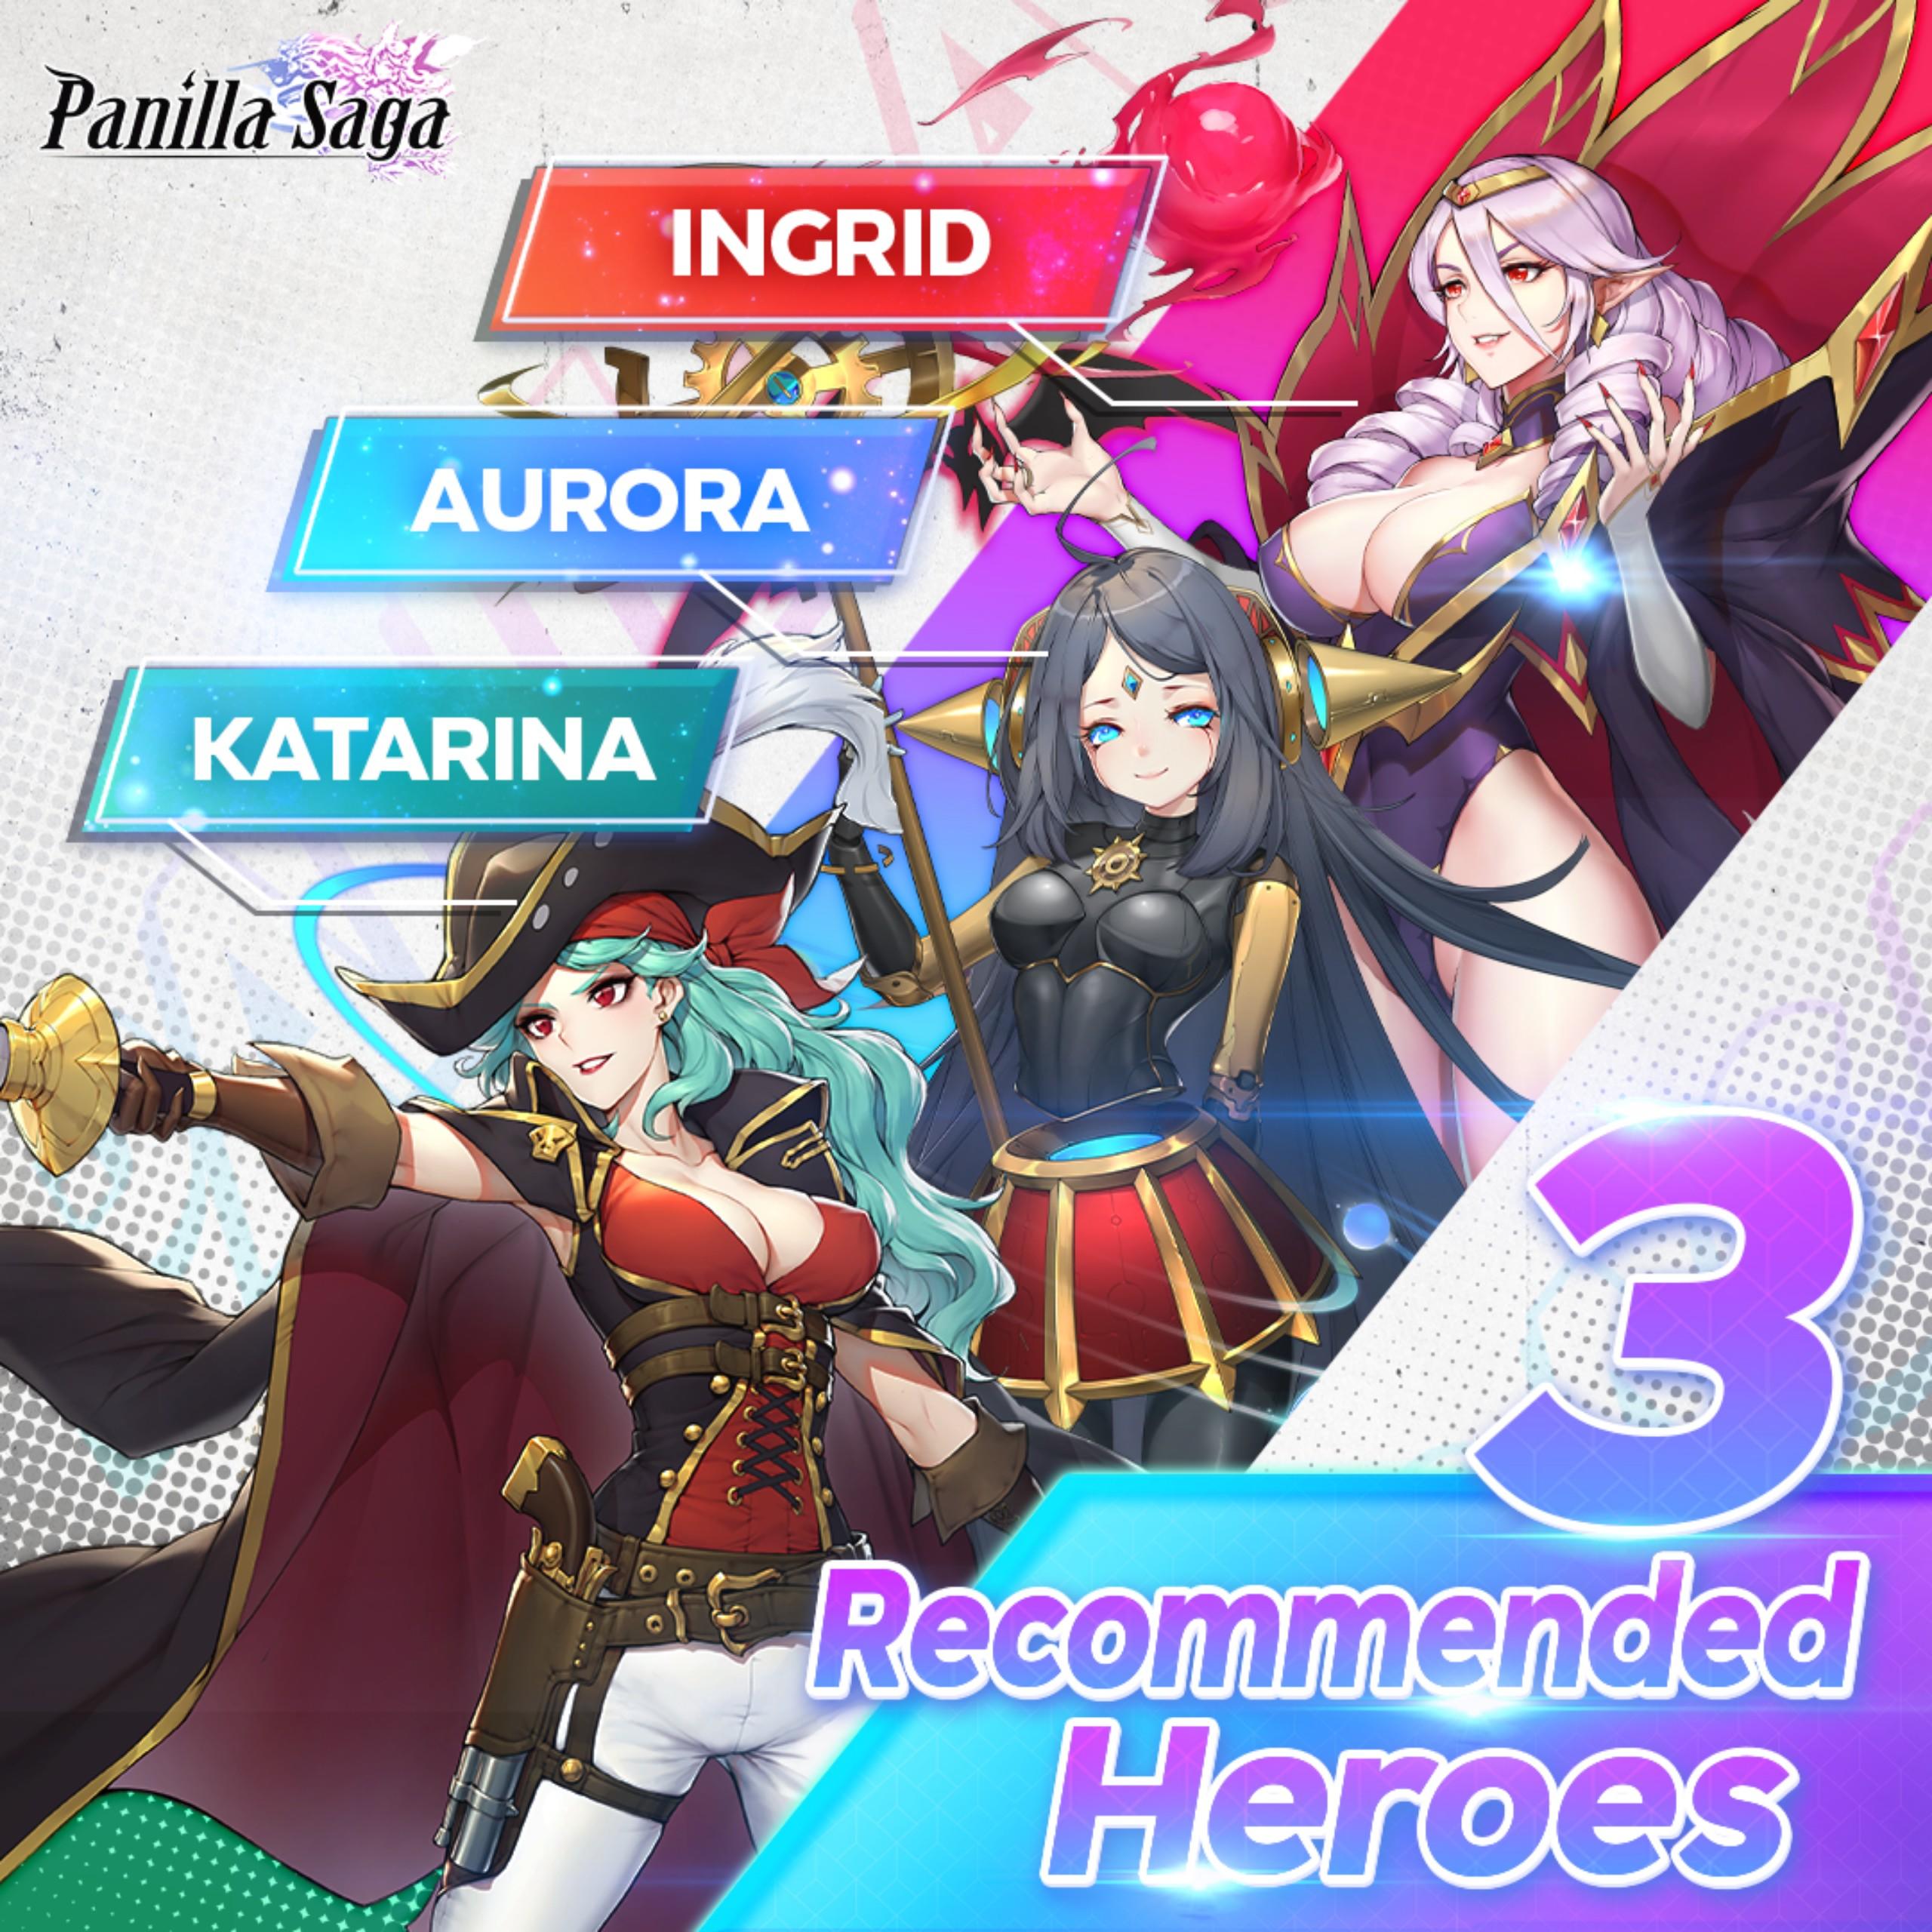 Don't missing these three powerful female heroes!!